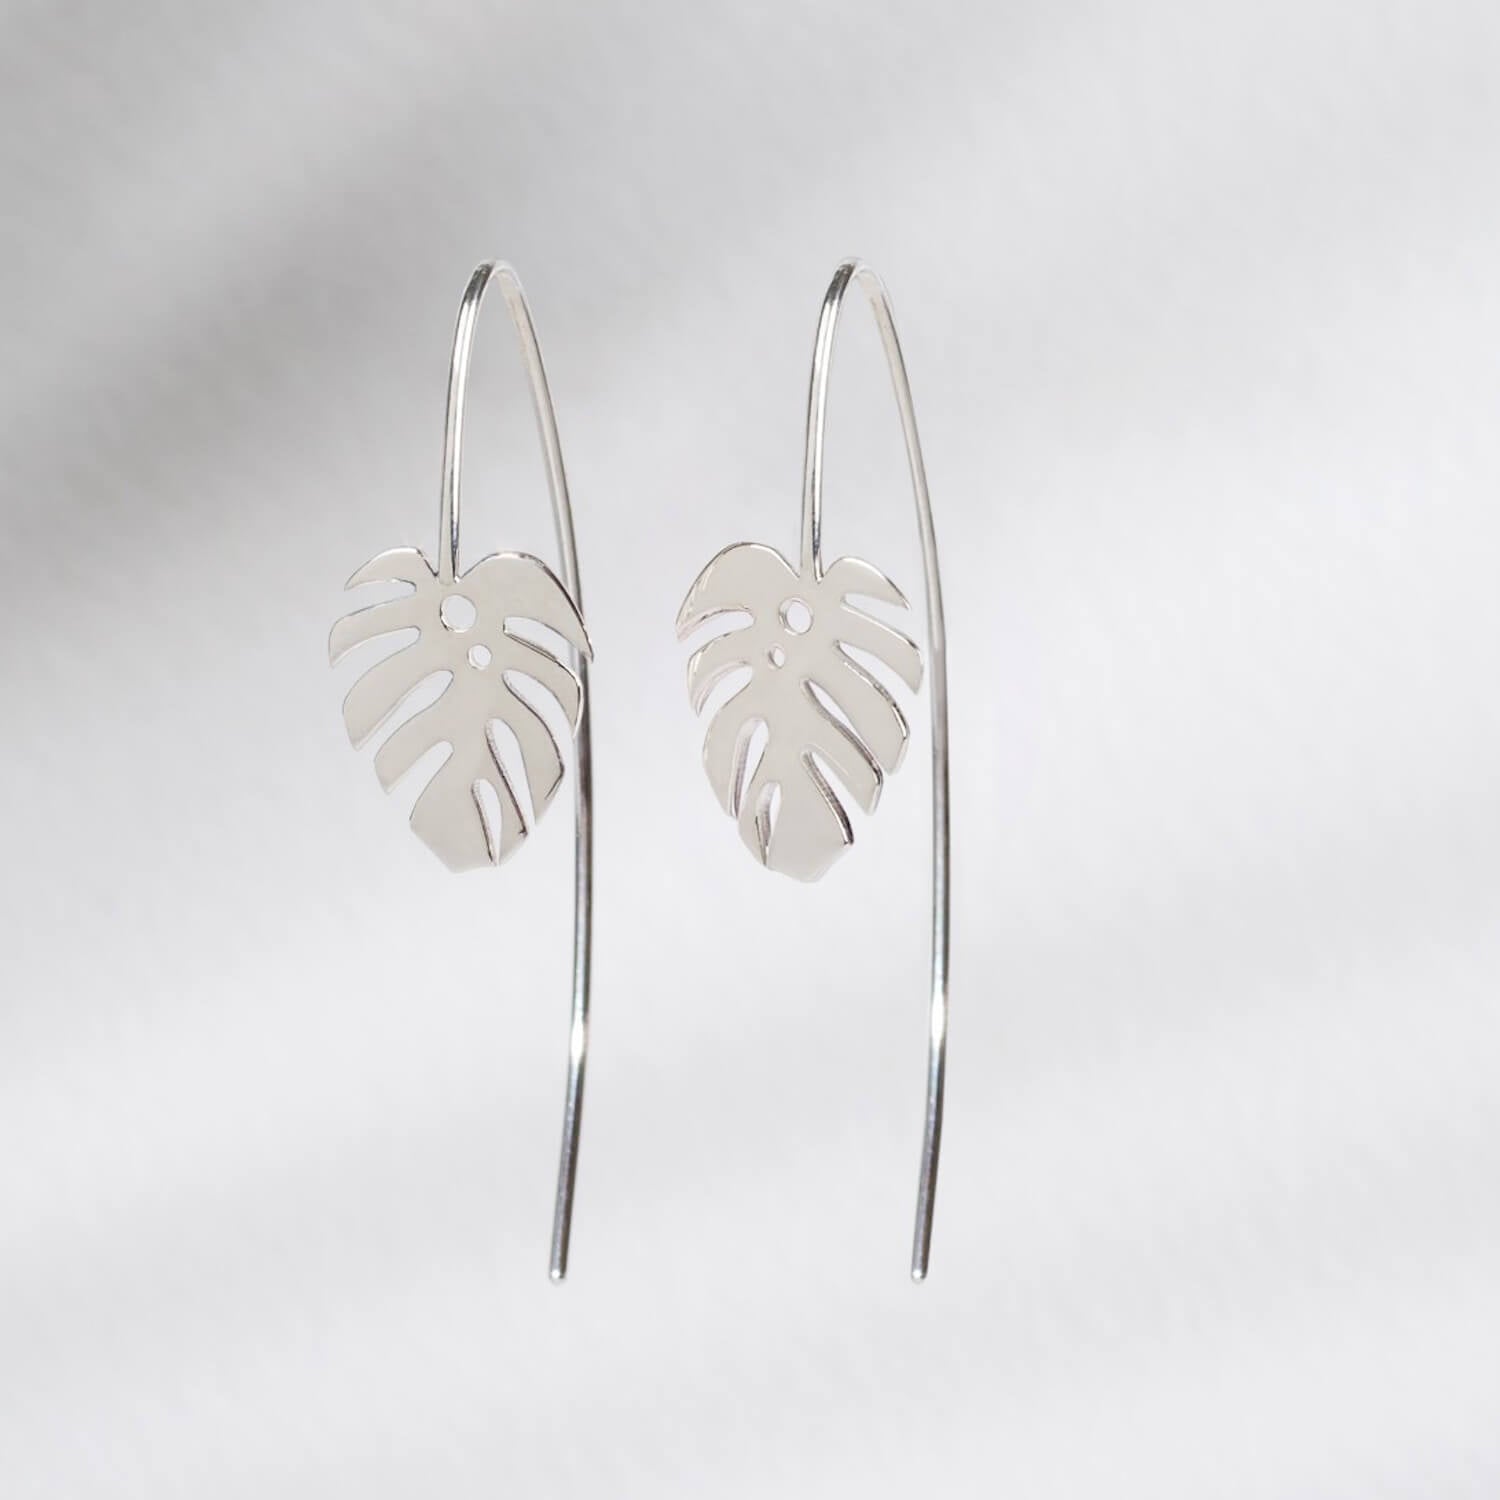 A close up of a pair of silver dropback earrings with large monstera leaf charms